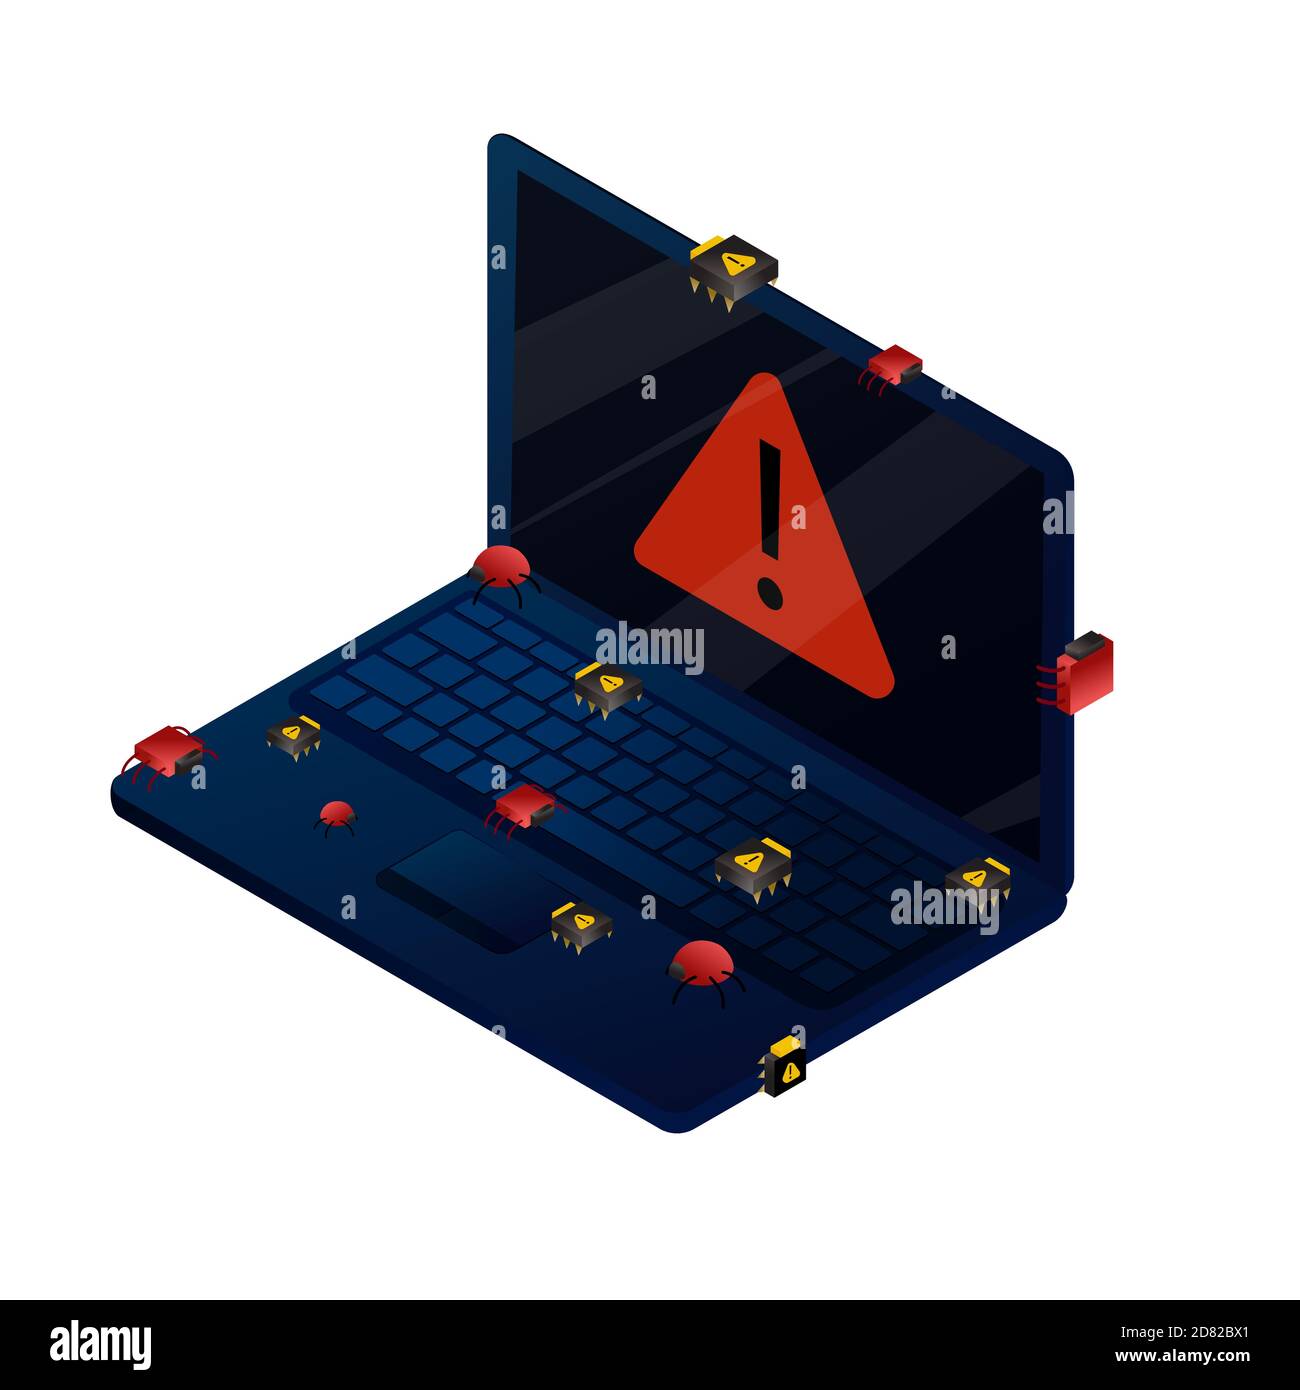 Computer bugs and viruses attacked laptop. Isometric vector illustration data protection, information security concept. PC with red error symbol on di Stock Vector